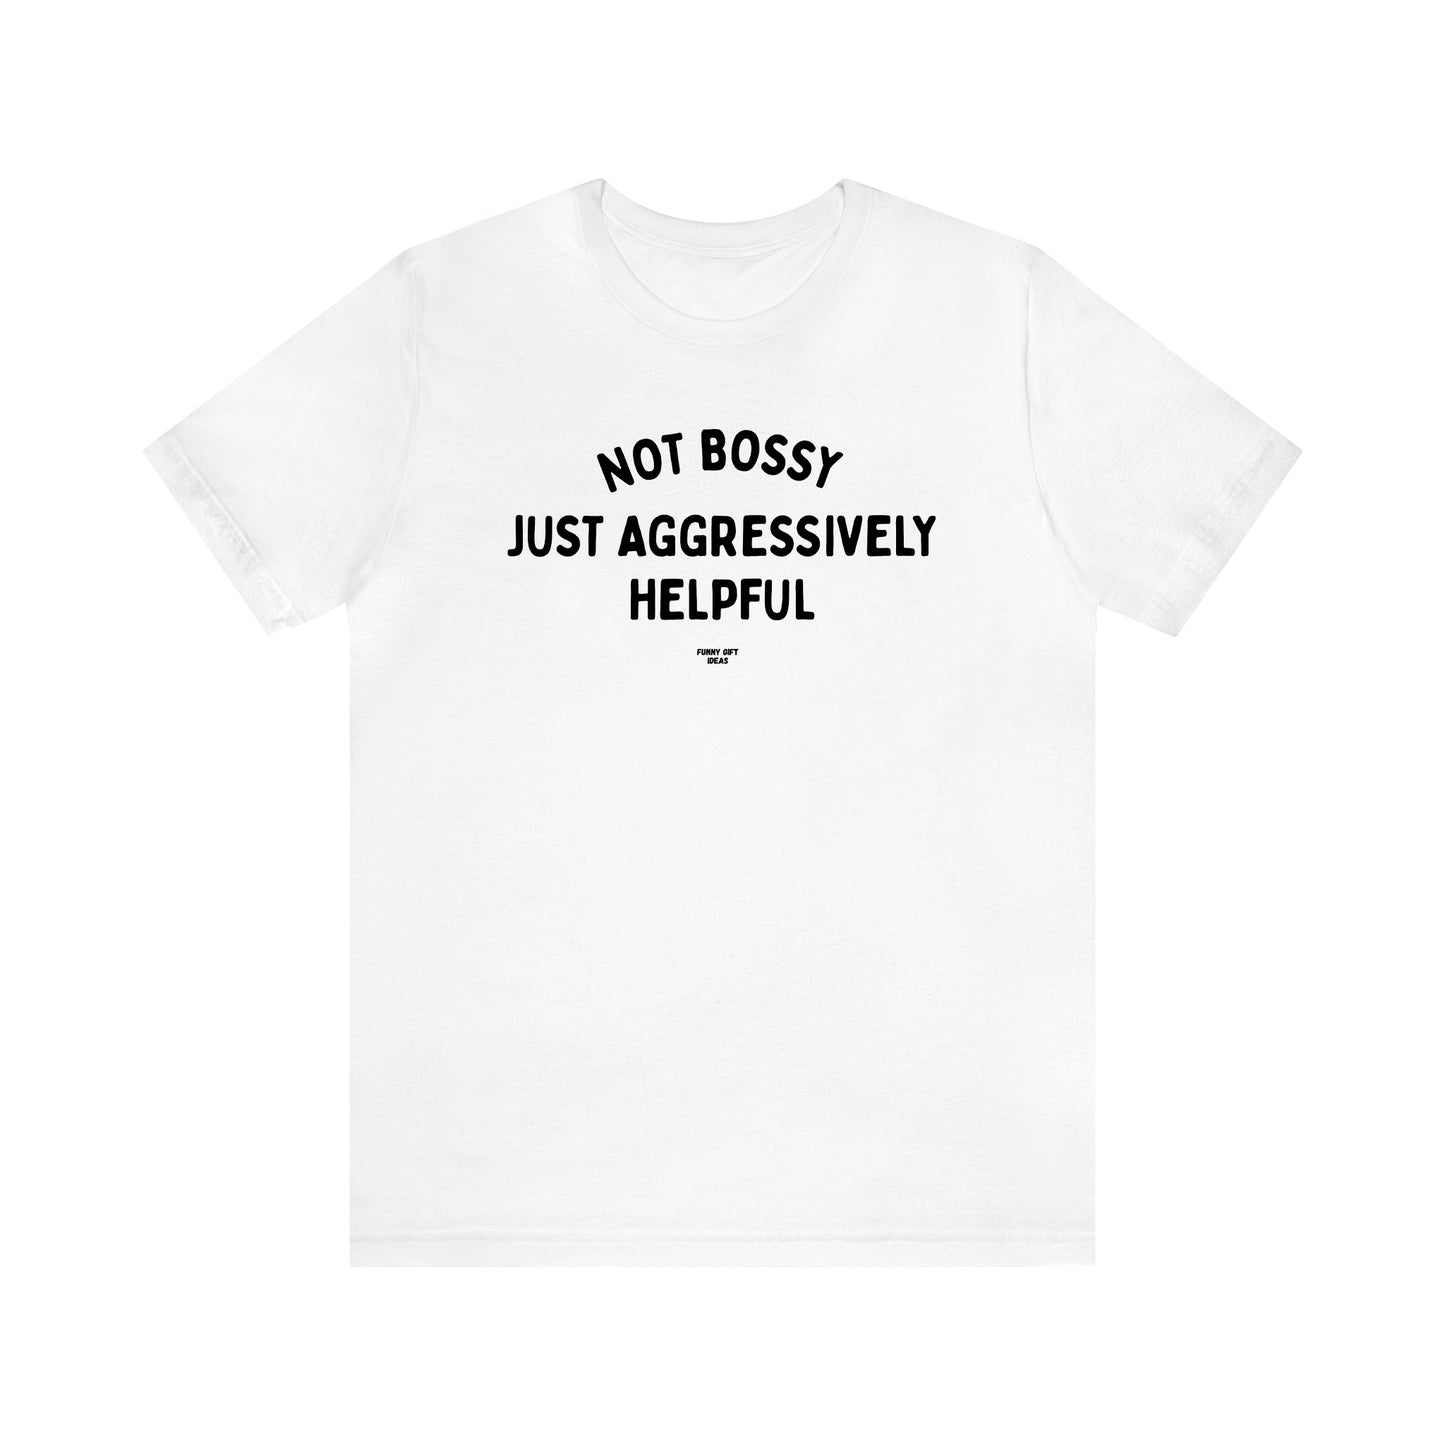 Men's T Shirts Not Bossy Just Aggressively Helpful - Funny Gift Ideas